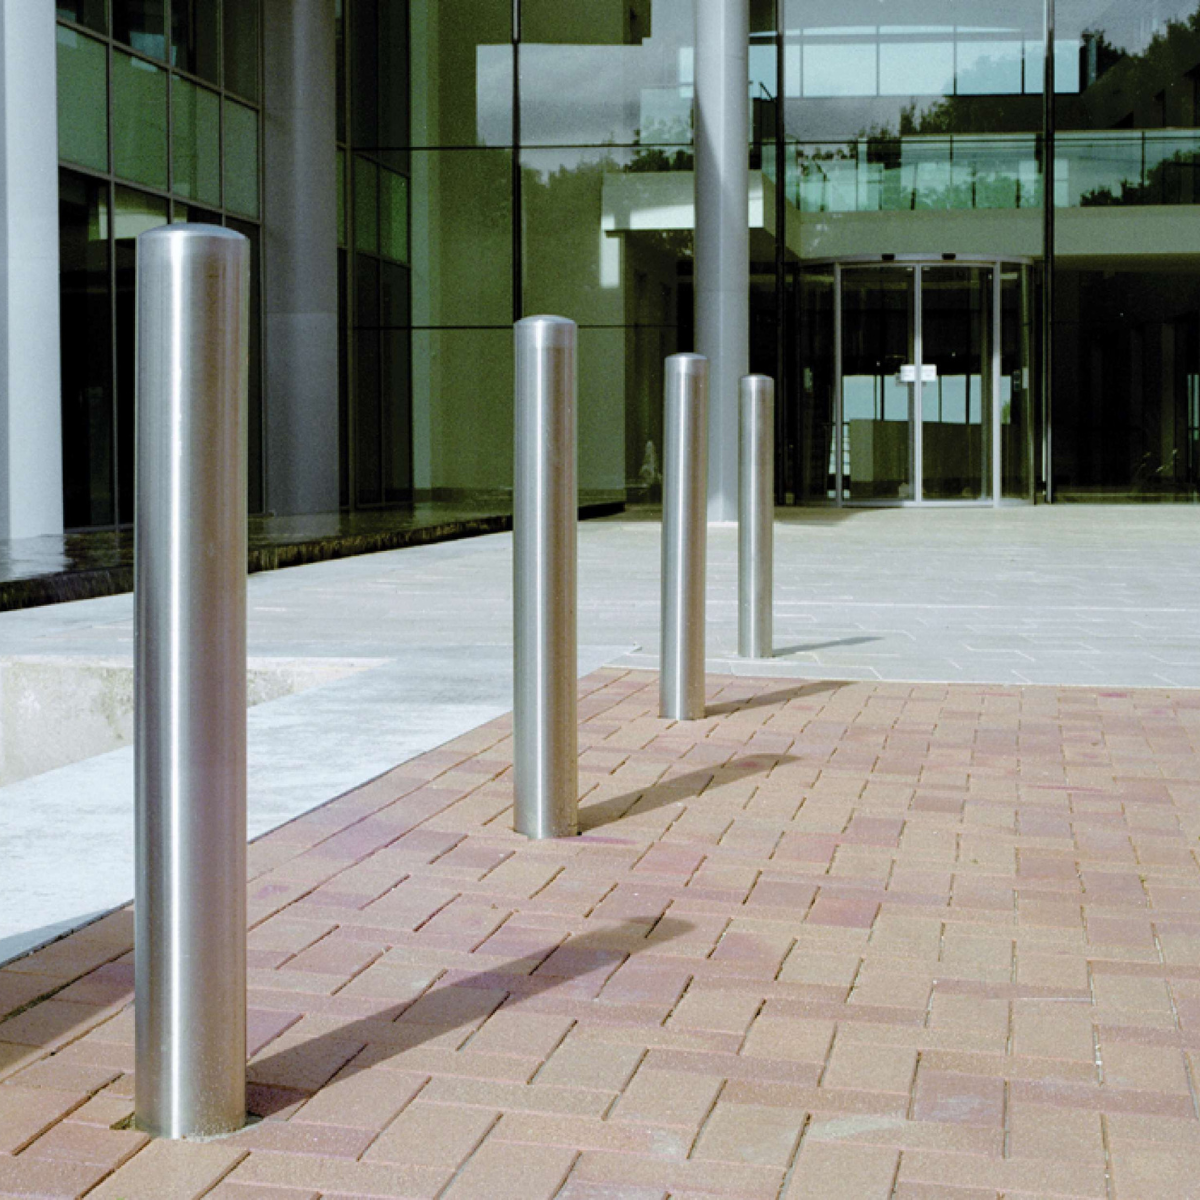 stainless steel static bollards in front of business building